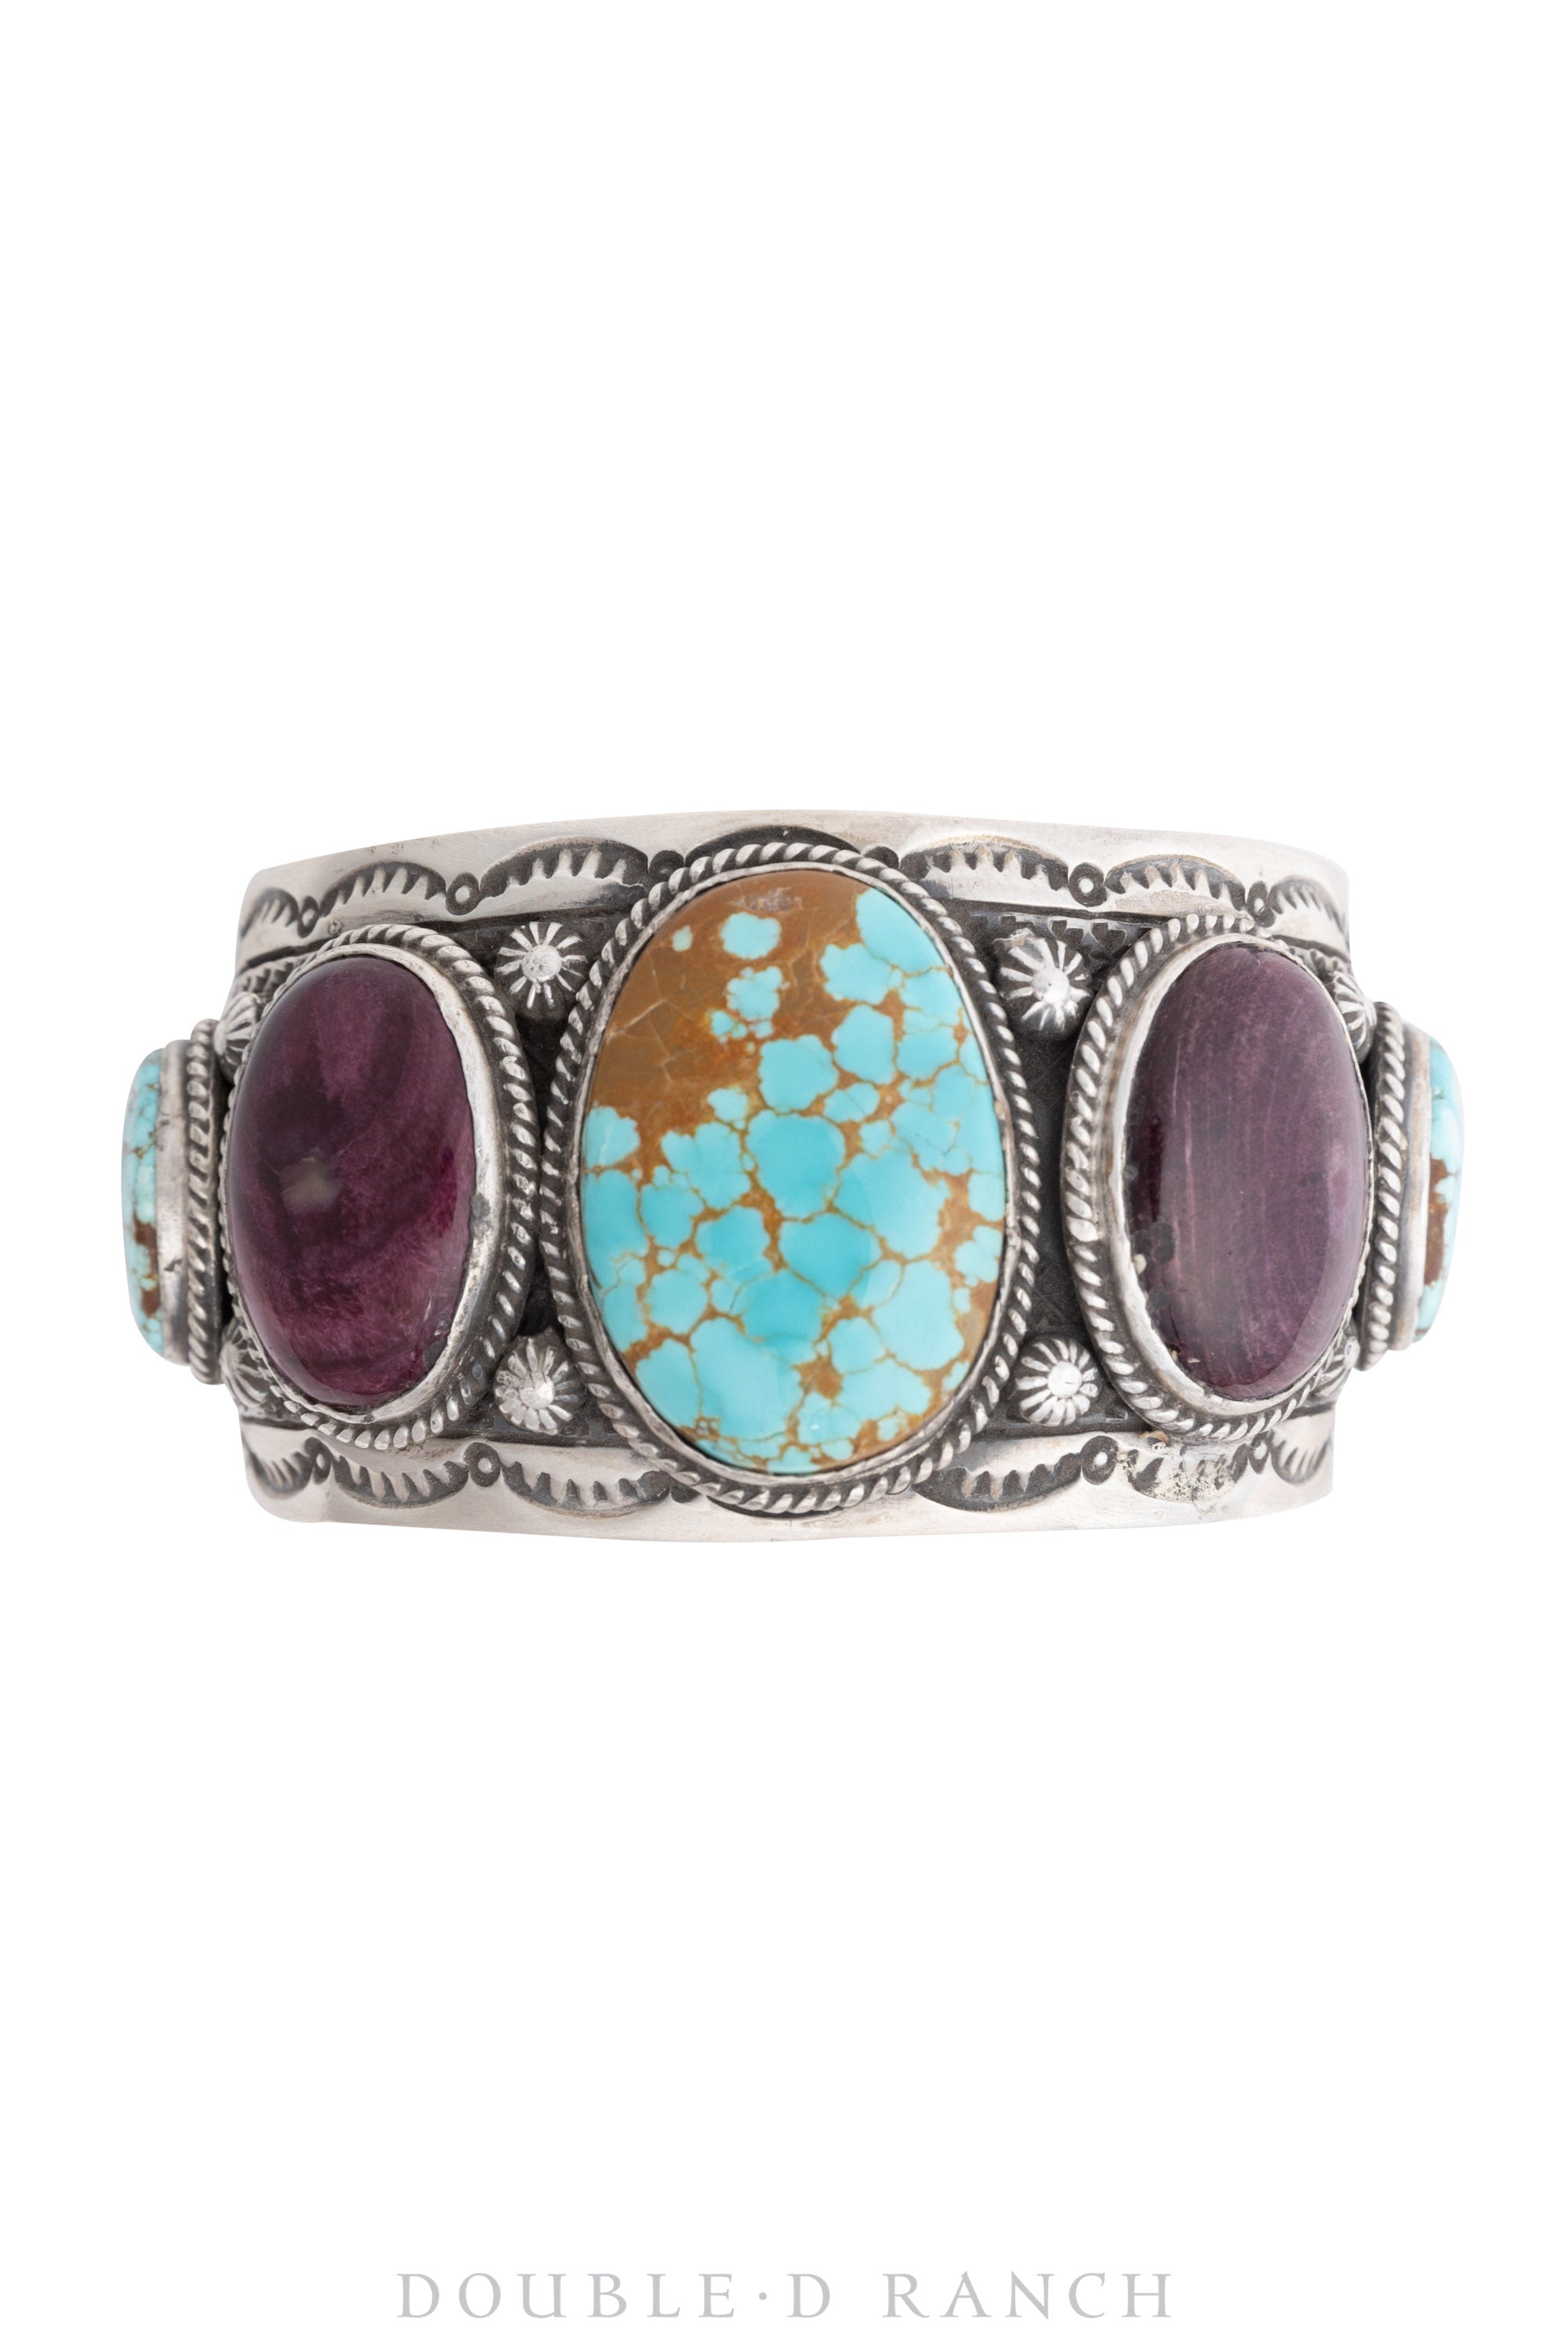 Cuff,Natural Stone, Turquoise & Purple Spiny Oyster, 5 Stones, Hallmark, Contemporary, 3415